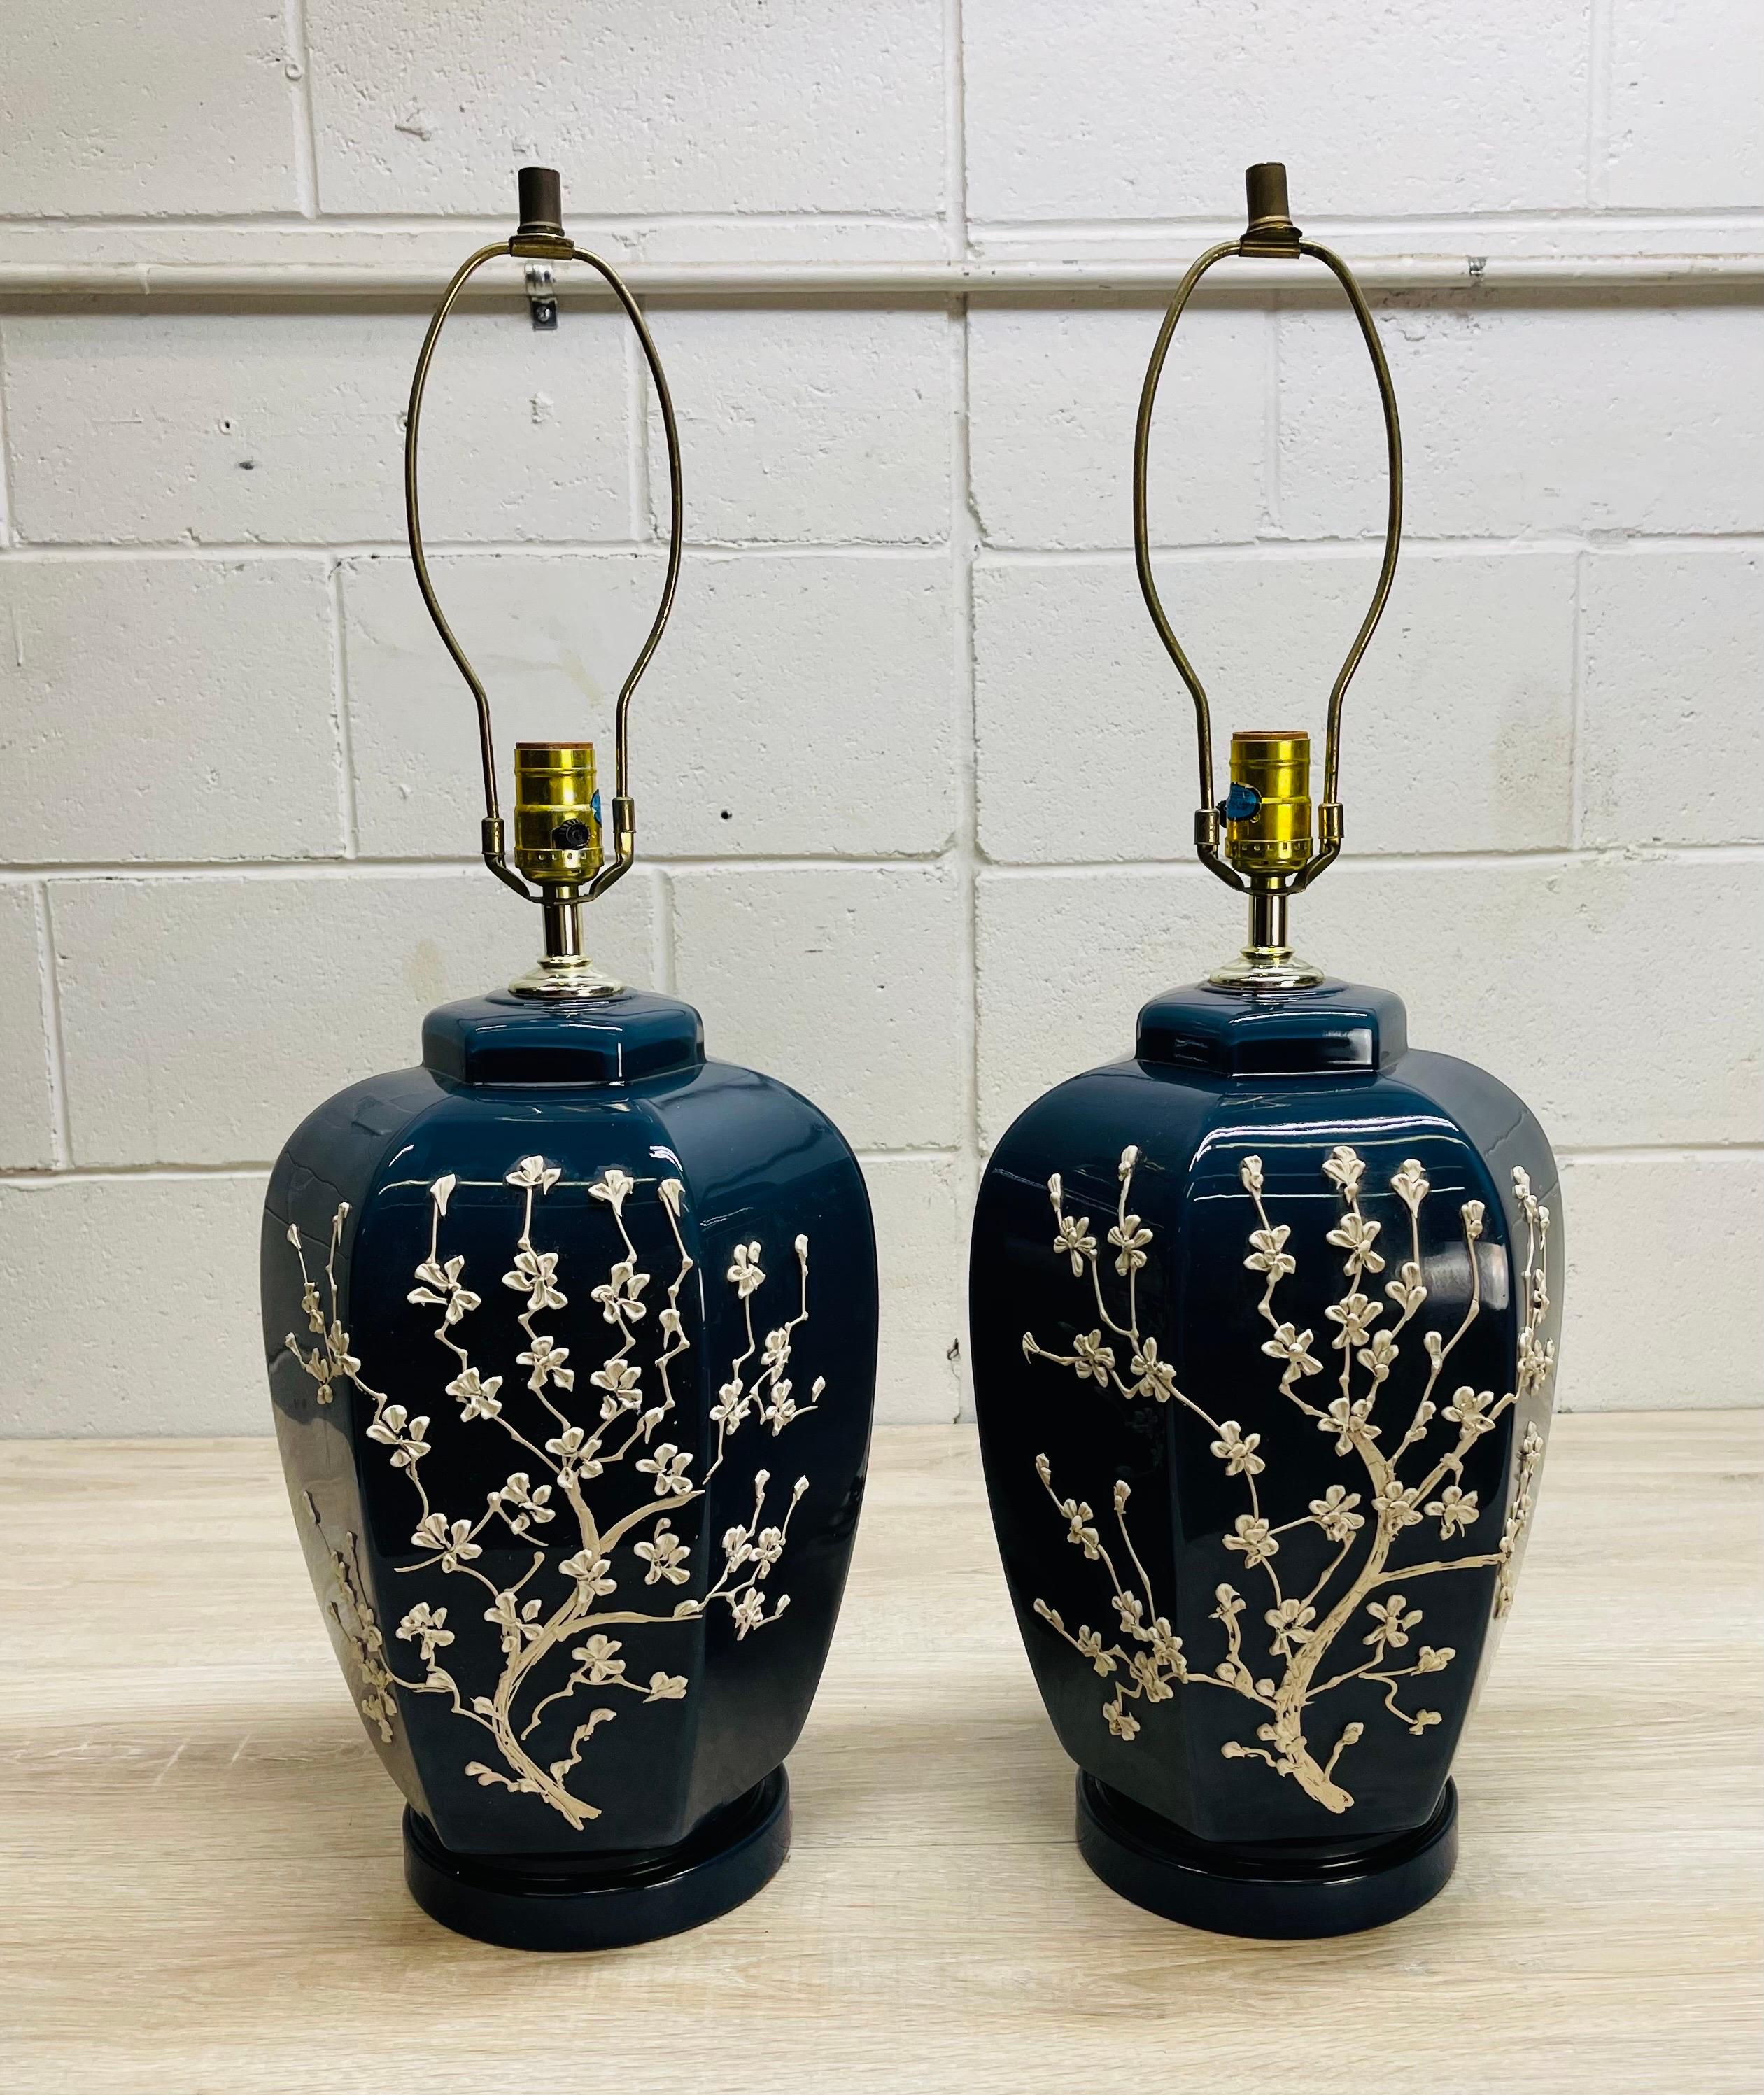 Vintage 1960s pair of blue ceramic six sided table lamps with white aplied flowers. The floral design covers the front and sides of the lamps. The lamps are wired for the US and in working condition. The lamps use a standard 100W bulb. Socket, 19”H.